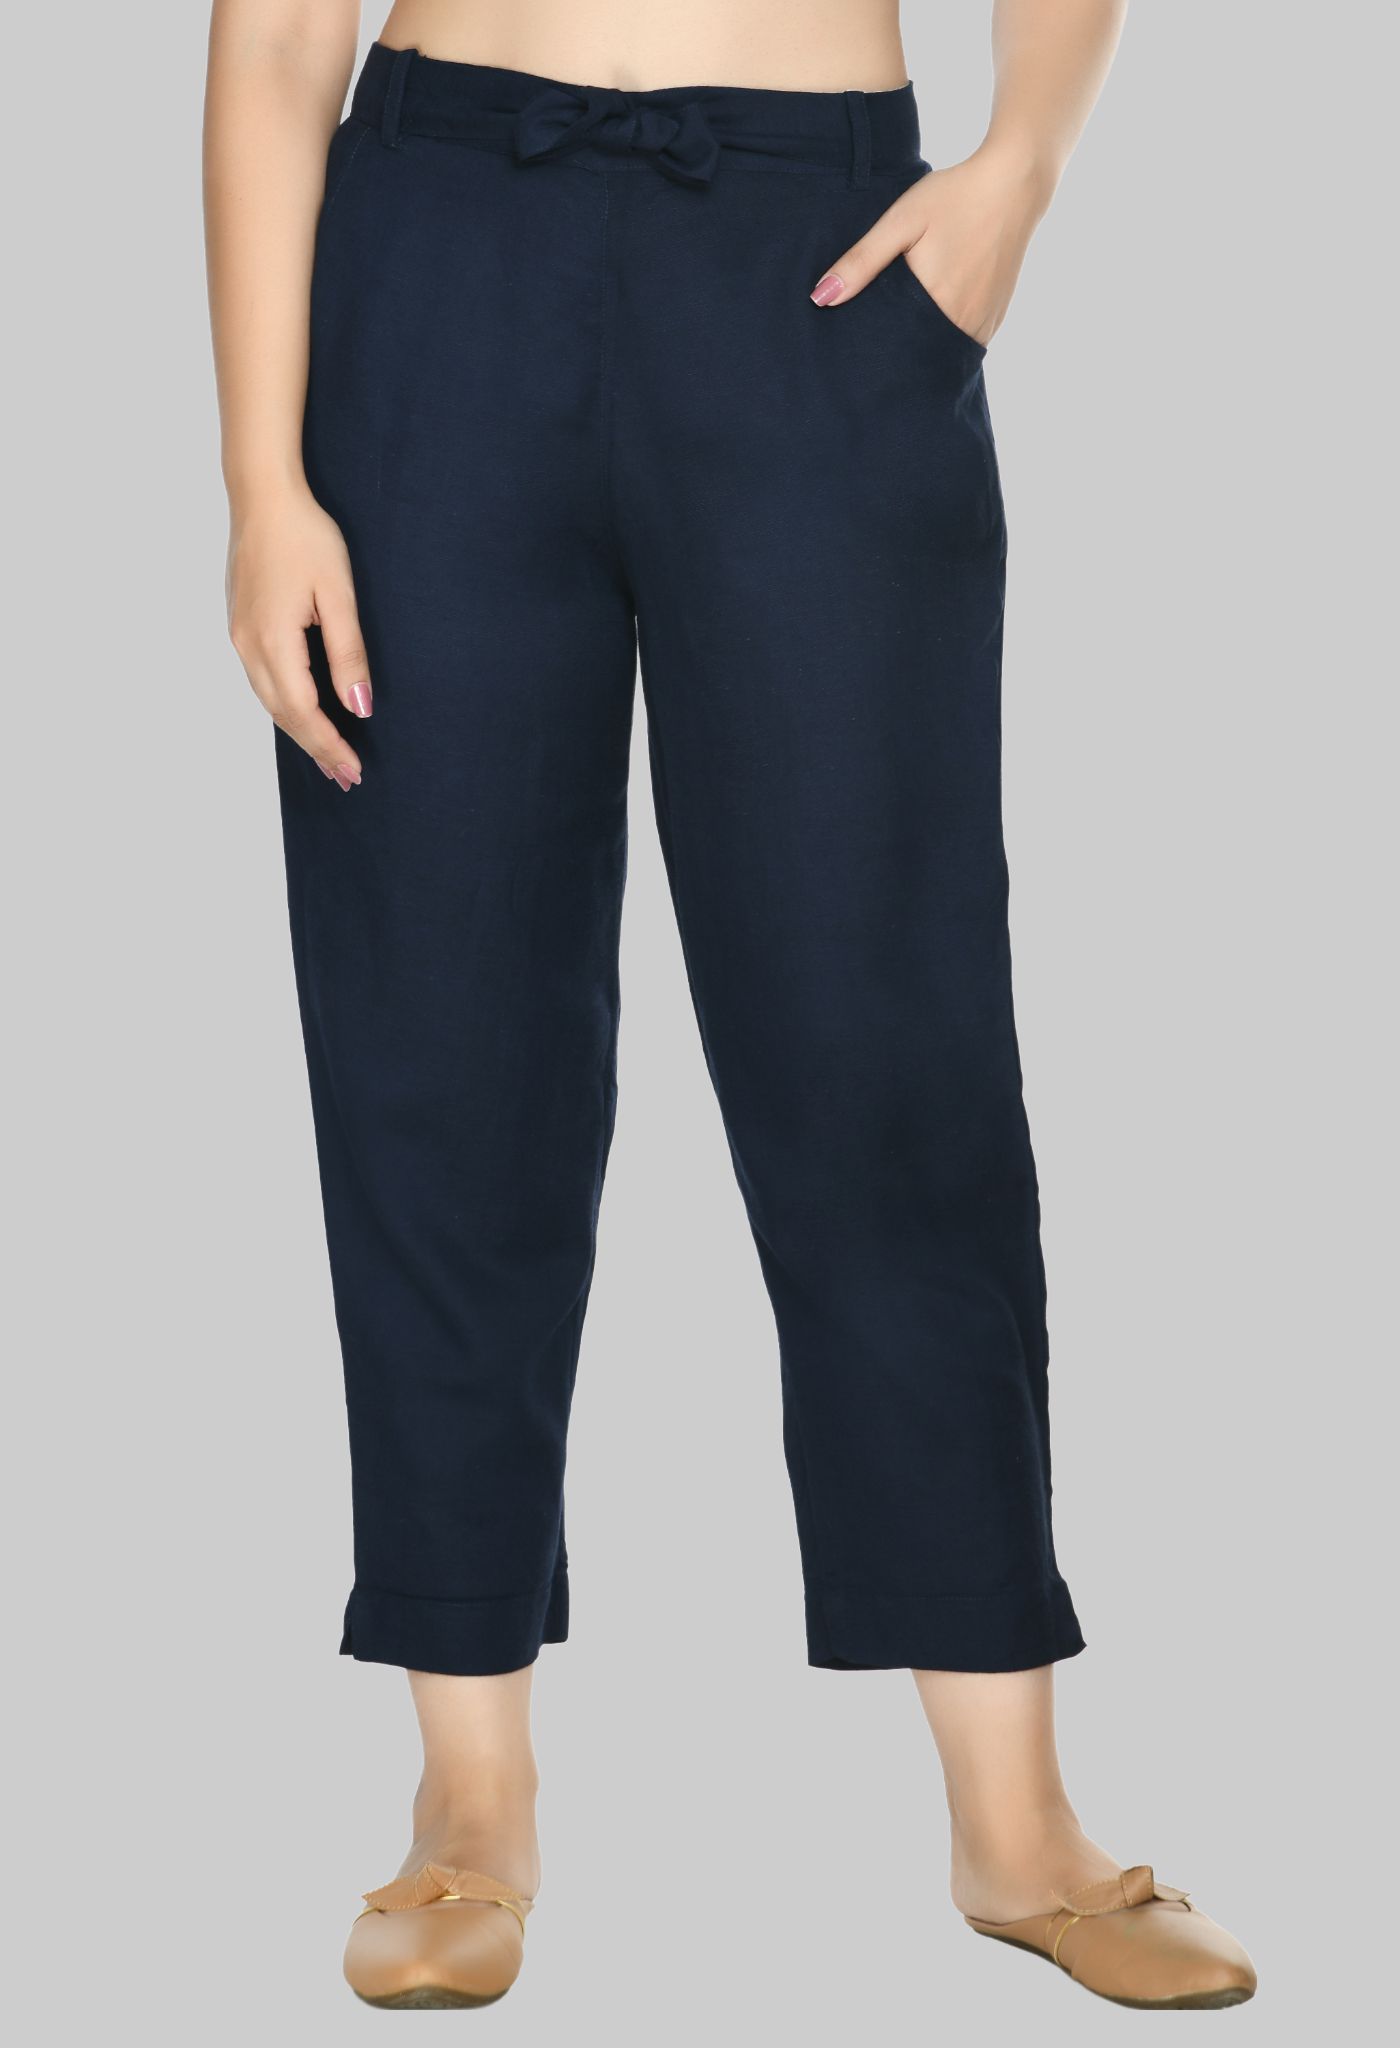     			PREEGO - Navy Blue Rayon Regular Women's Casual Pants ( Pack of 1 )